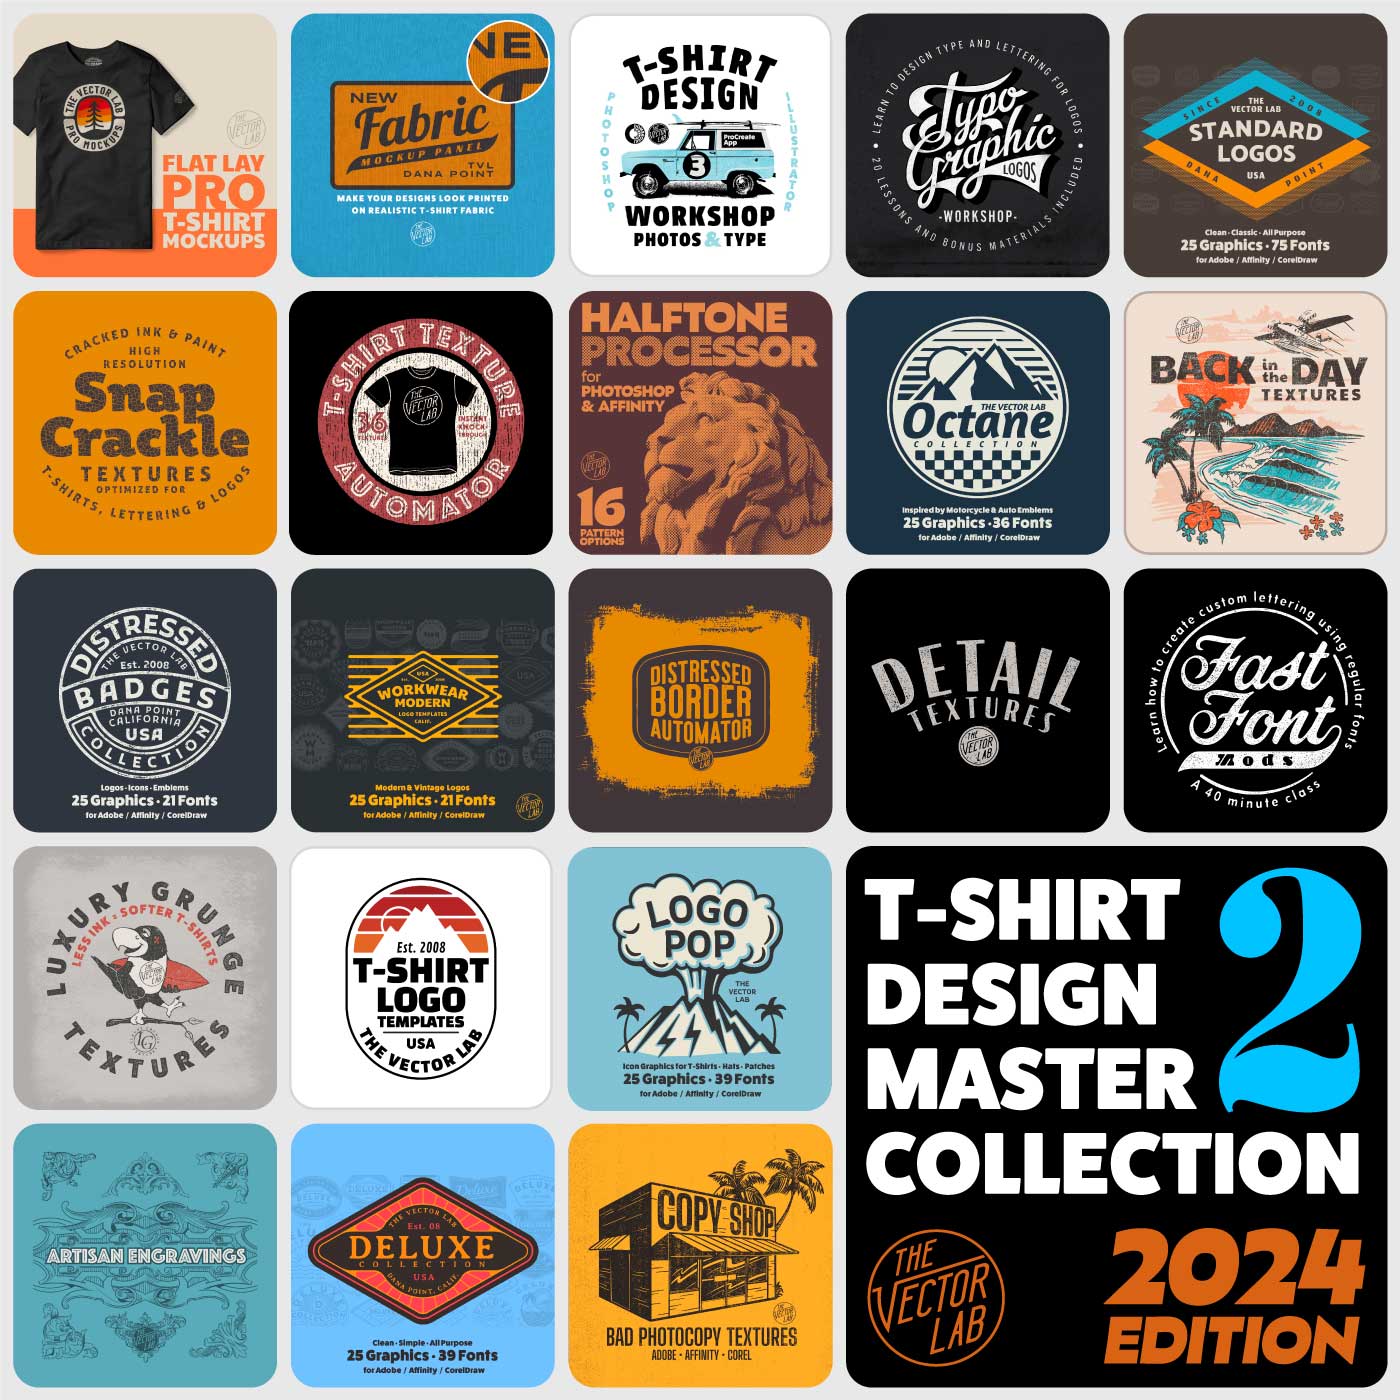 T-Shirt Design Master Collection 2